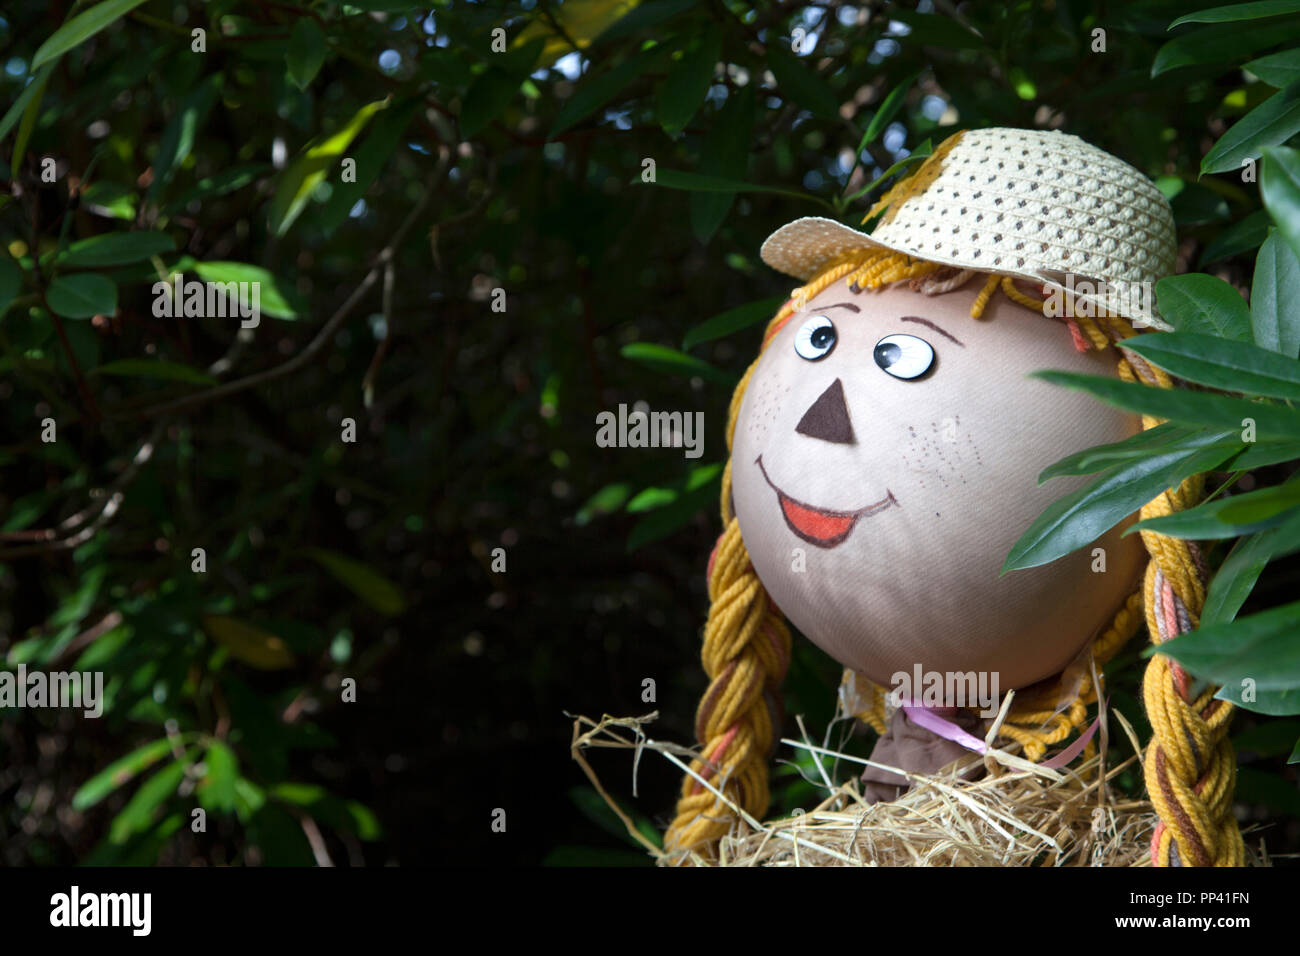 Head of a scarecrow girl with wool pigtails and straw hat.Set within woodland. Stock Photo